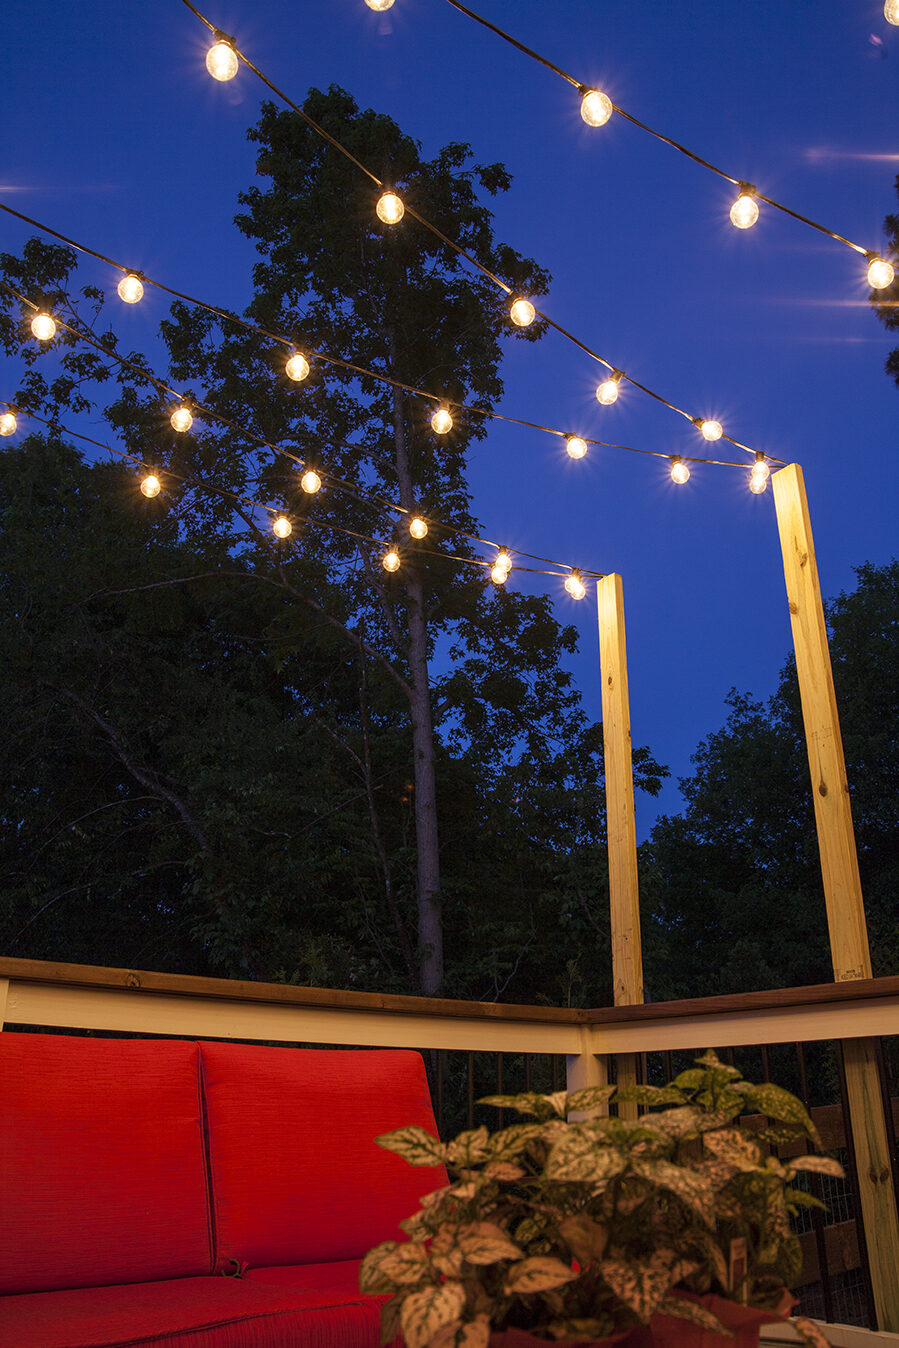 Hanging Patio String Lights: A Pattern of Perfection - Yard Envy